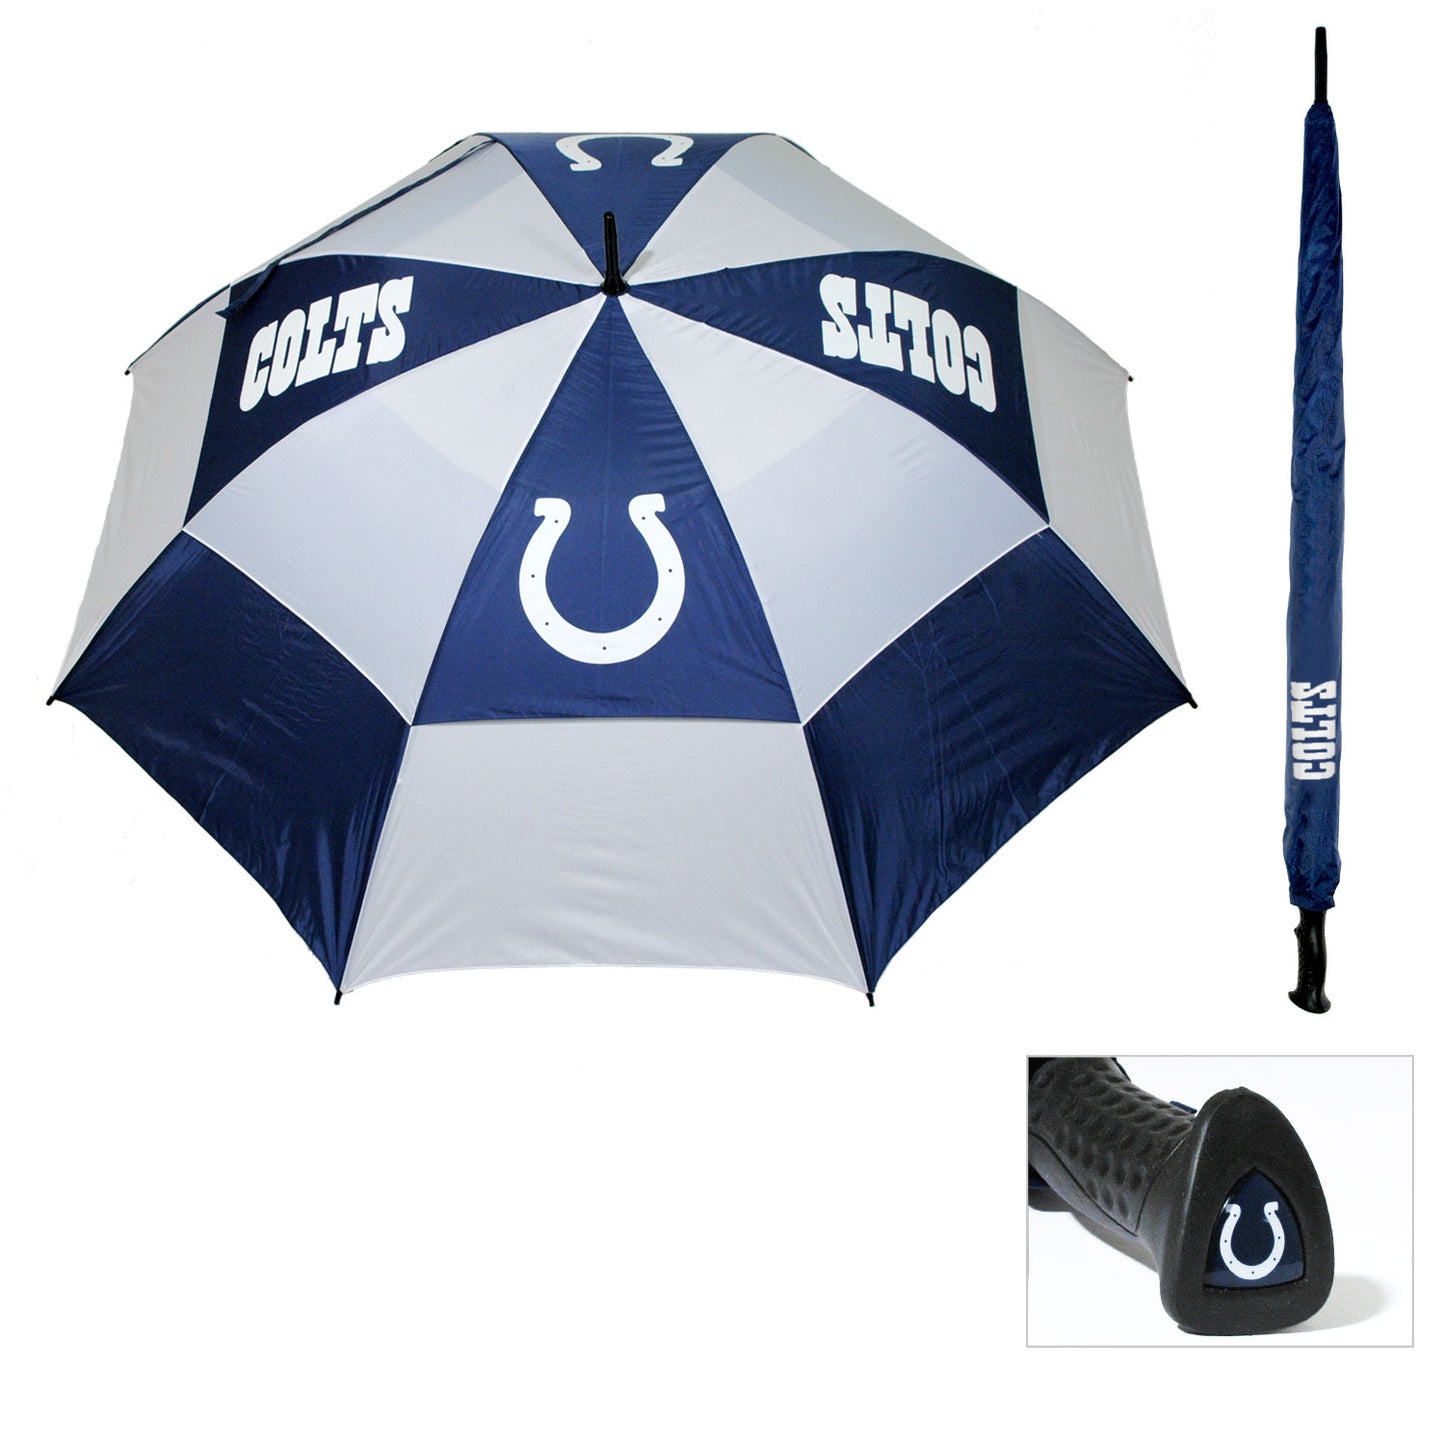 Indianapolis Colts 62" Golf Umbrella by Team Golf